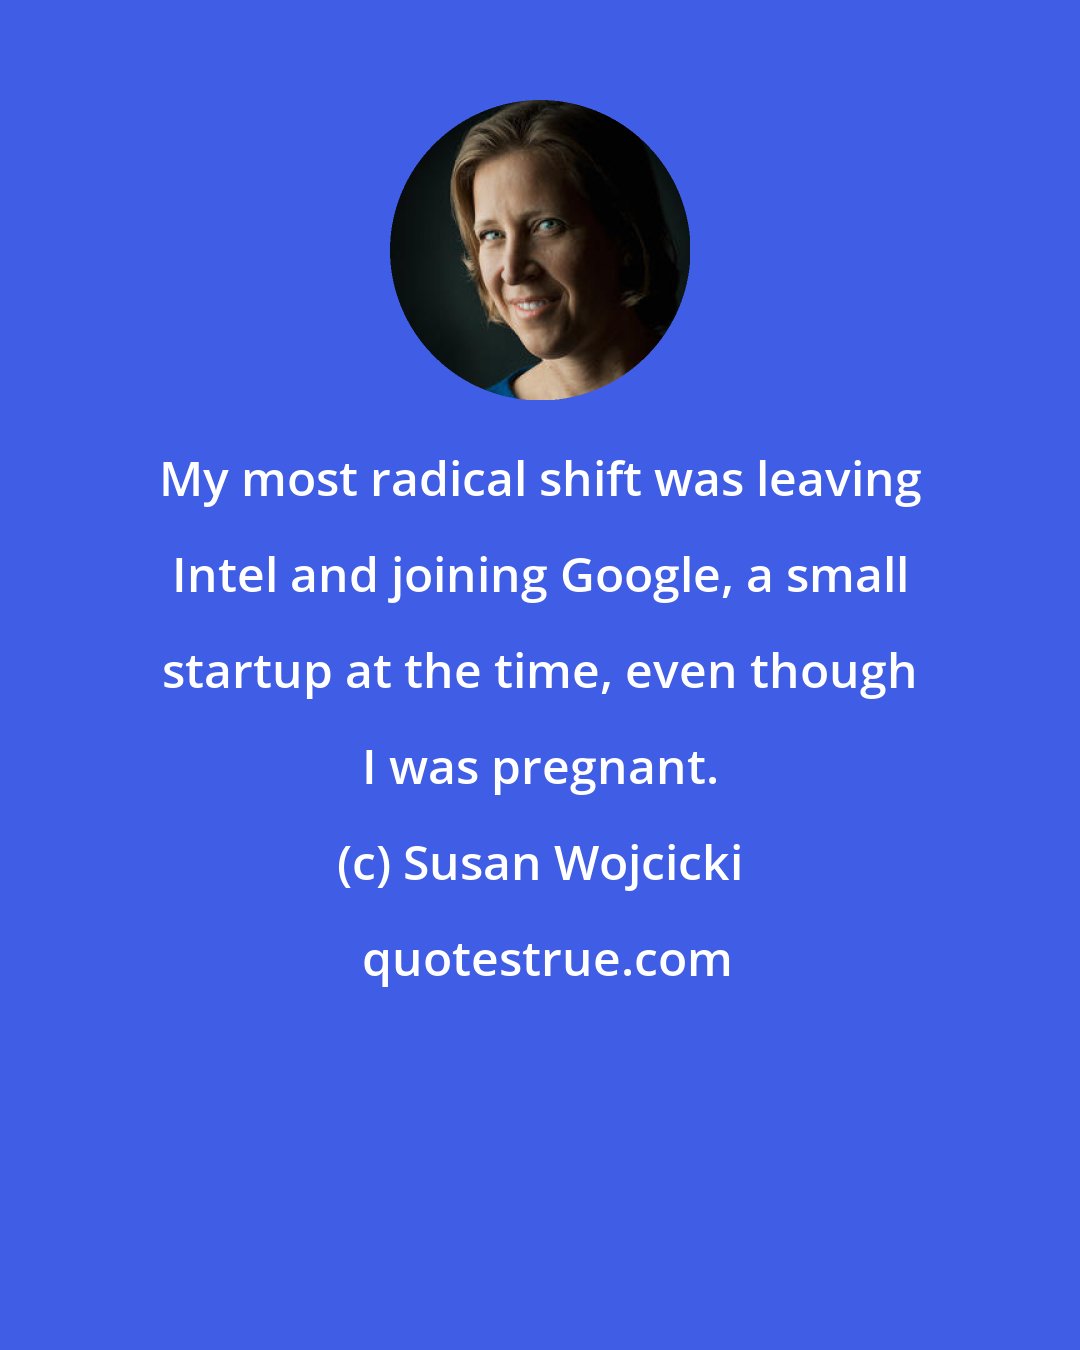 Susan Wojcicki: My most radical shift was leaving Intel and joining Google, a small startup at the time, even though I was pregnant.